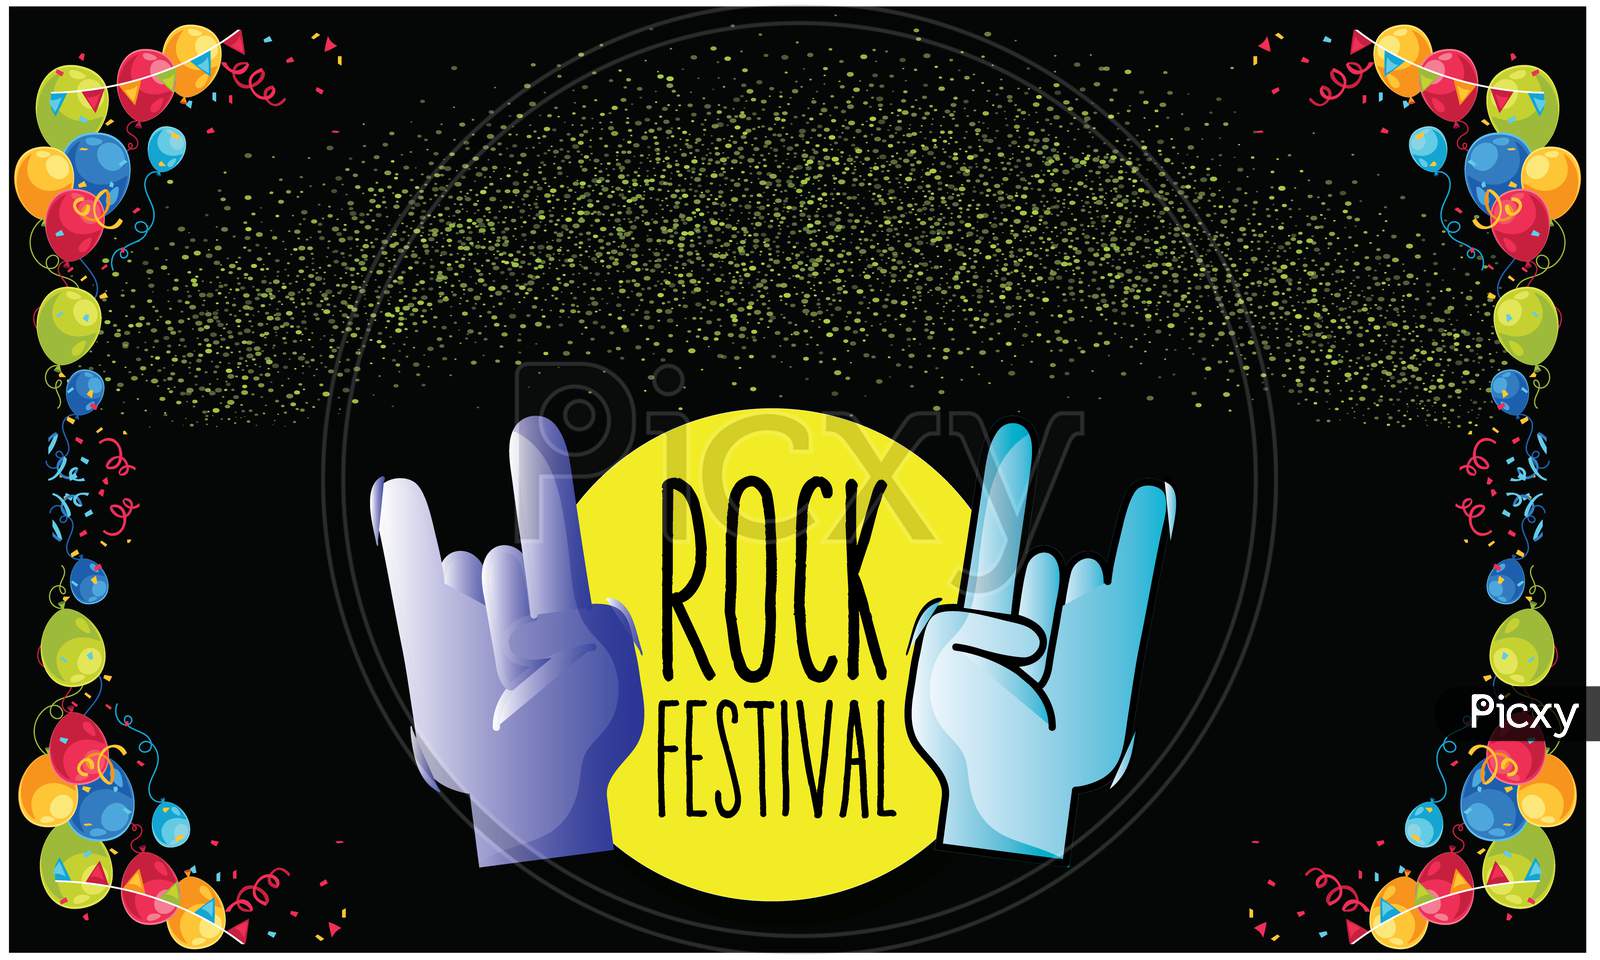 Rock Festival Is Just Going To Start Soon